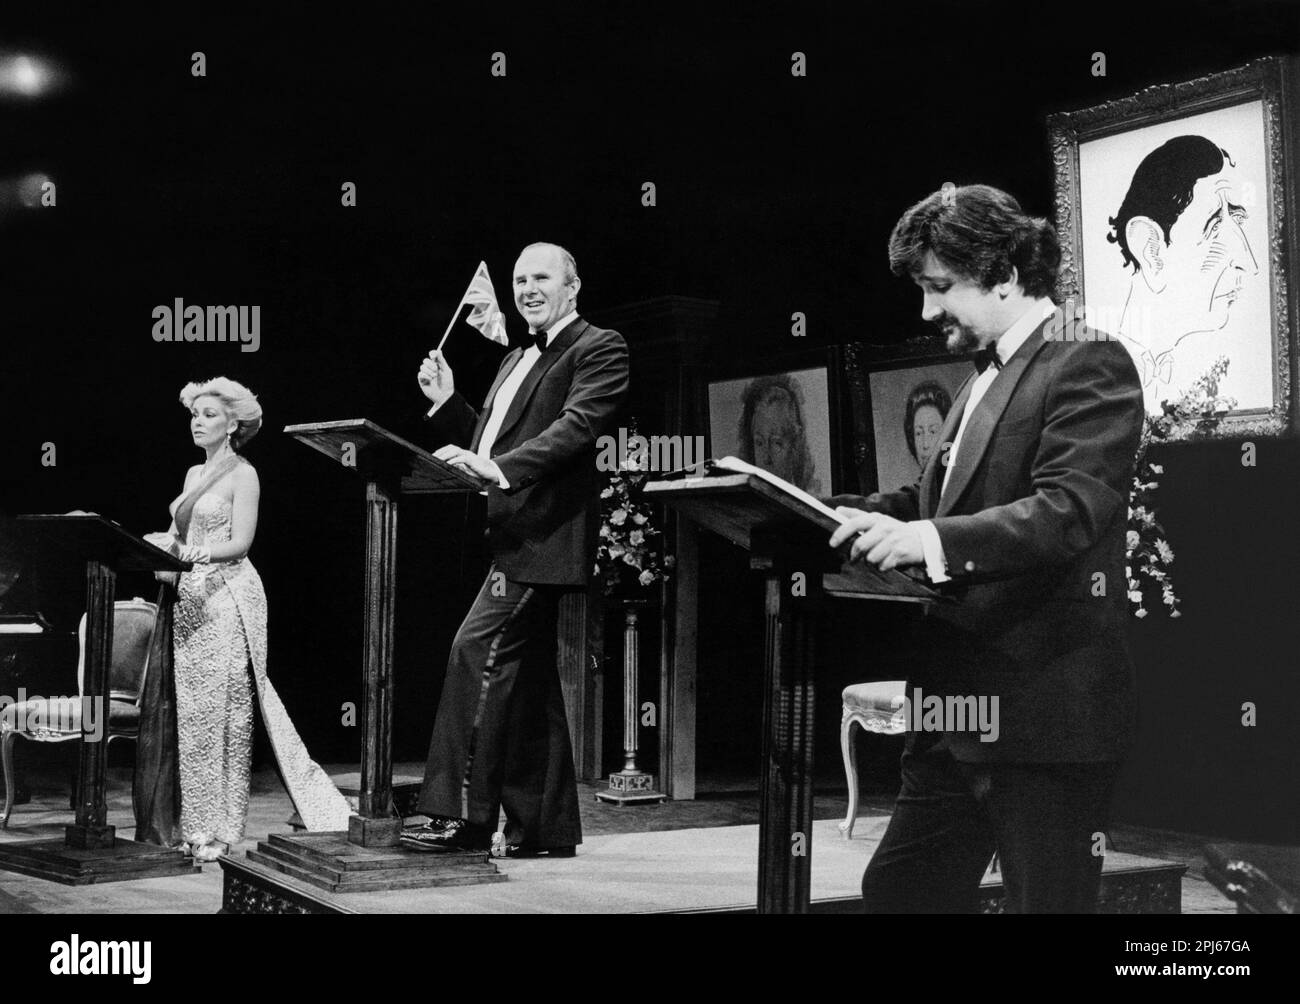 l-r: Pamela Stephenson, Clive James, Russell Davies in CHARLES CHARMING’S CHALLENGES ON THE PATHWAY TO THE THRONE by Clive James at the Apollo Theatre, London W1  10/06/1981  design: Roger Glossop  director: Kerry Crabbe Stock Photo